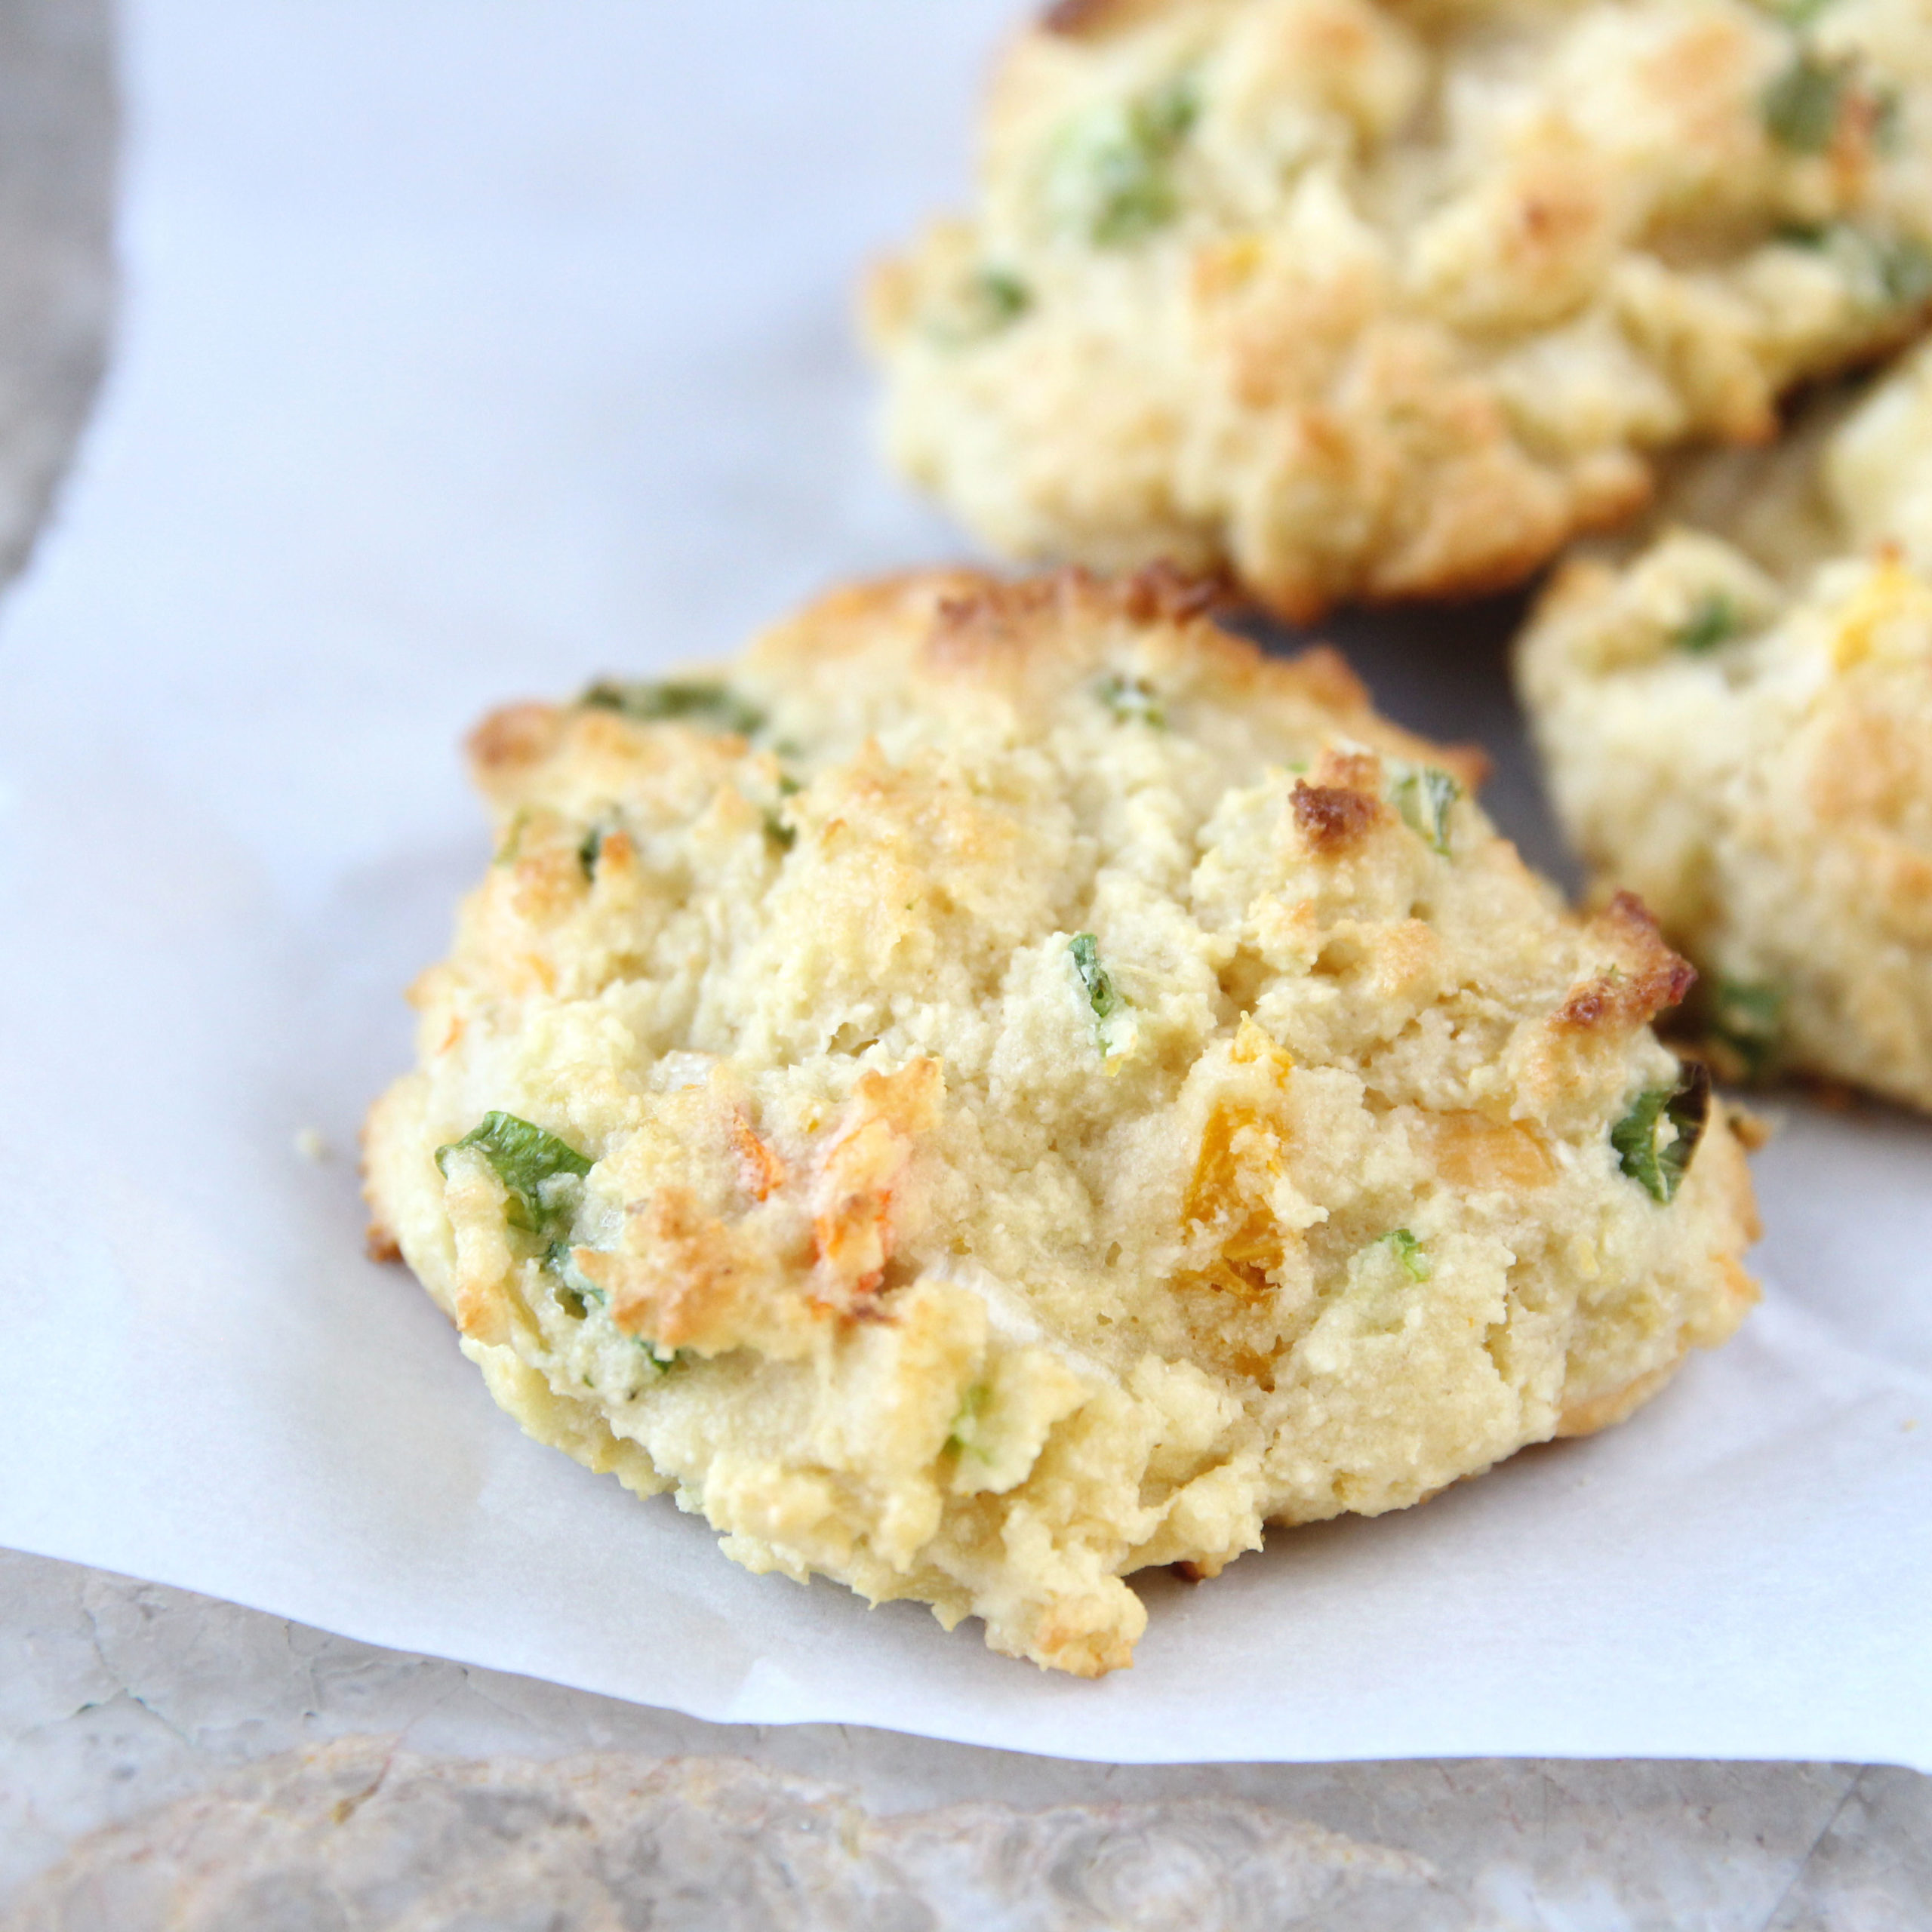 How to Make Gluten-Free Cheddar Drop Biscuits made with Cauliflower - Gluten Free Sweet Potato Pancakes